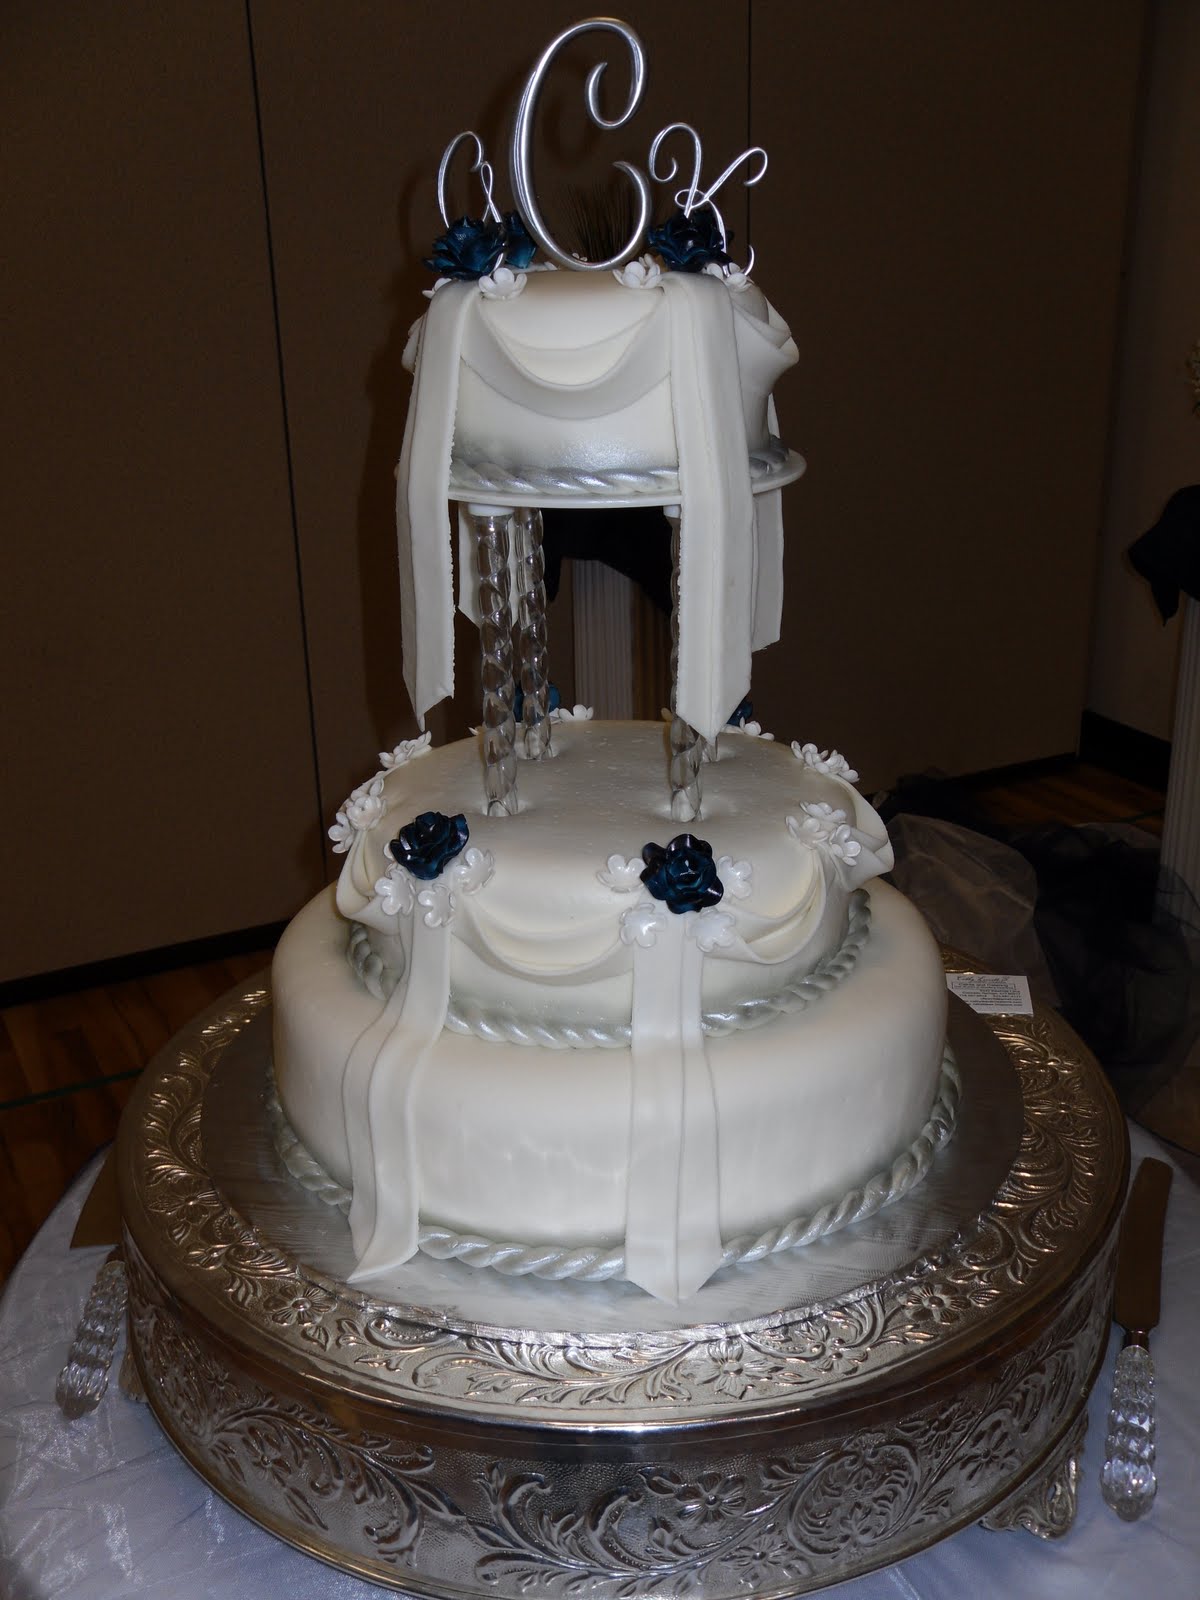 The wedding cake turned out